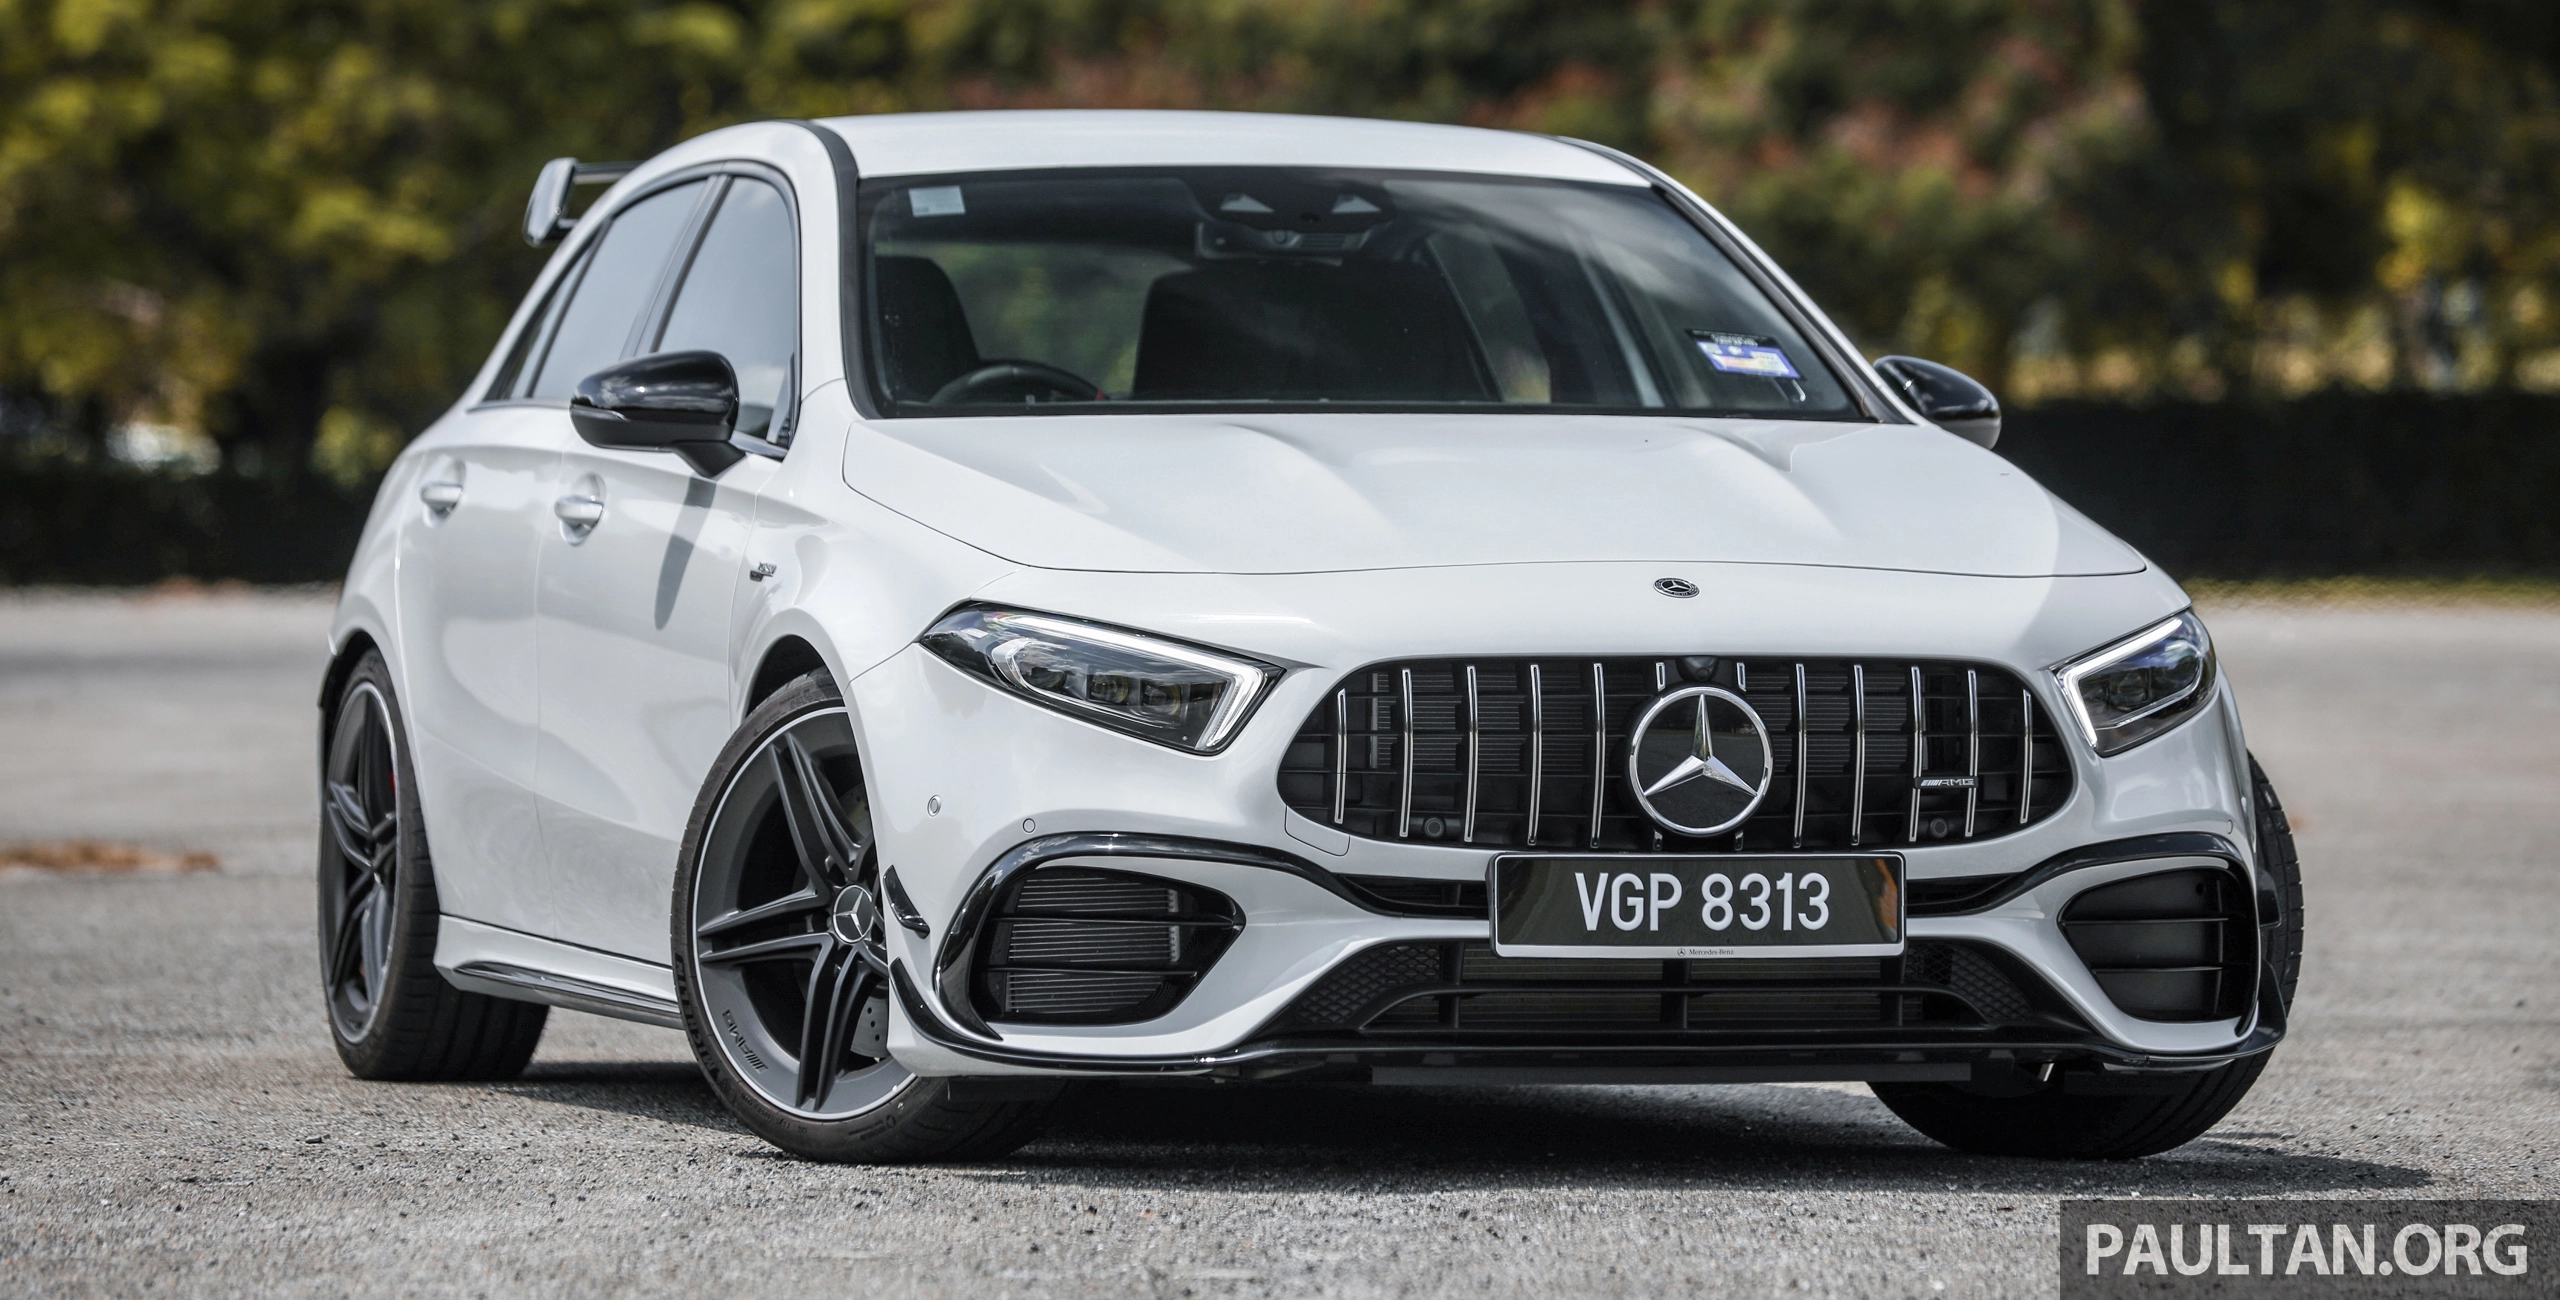 2022 Mercedes-AMG A 45 S、CLA 45 S 本地售价调涨！